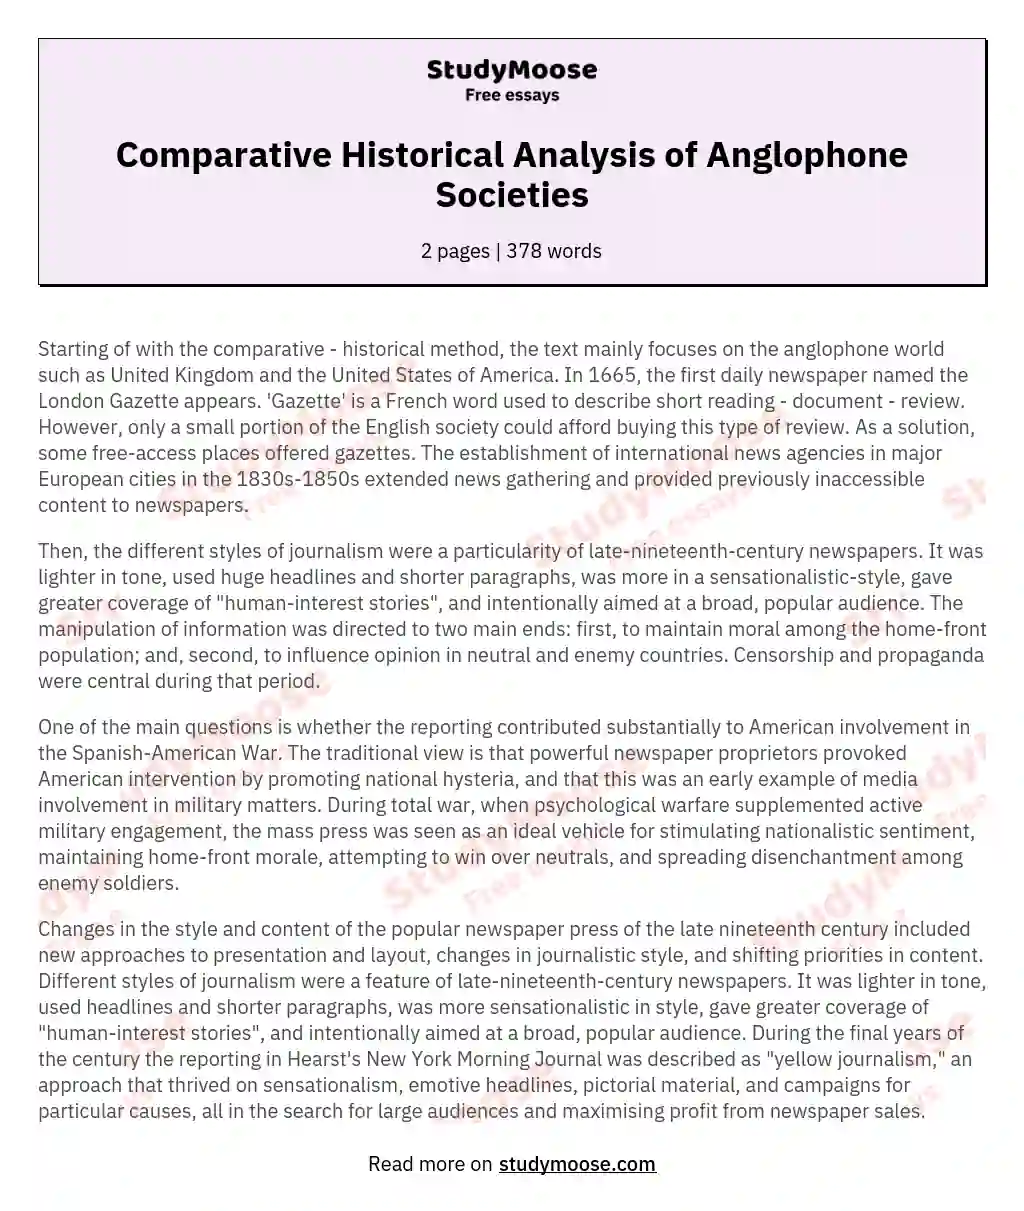 Comparative Historical Analysis of Anglophone Societies essay